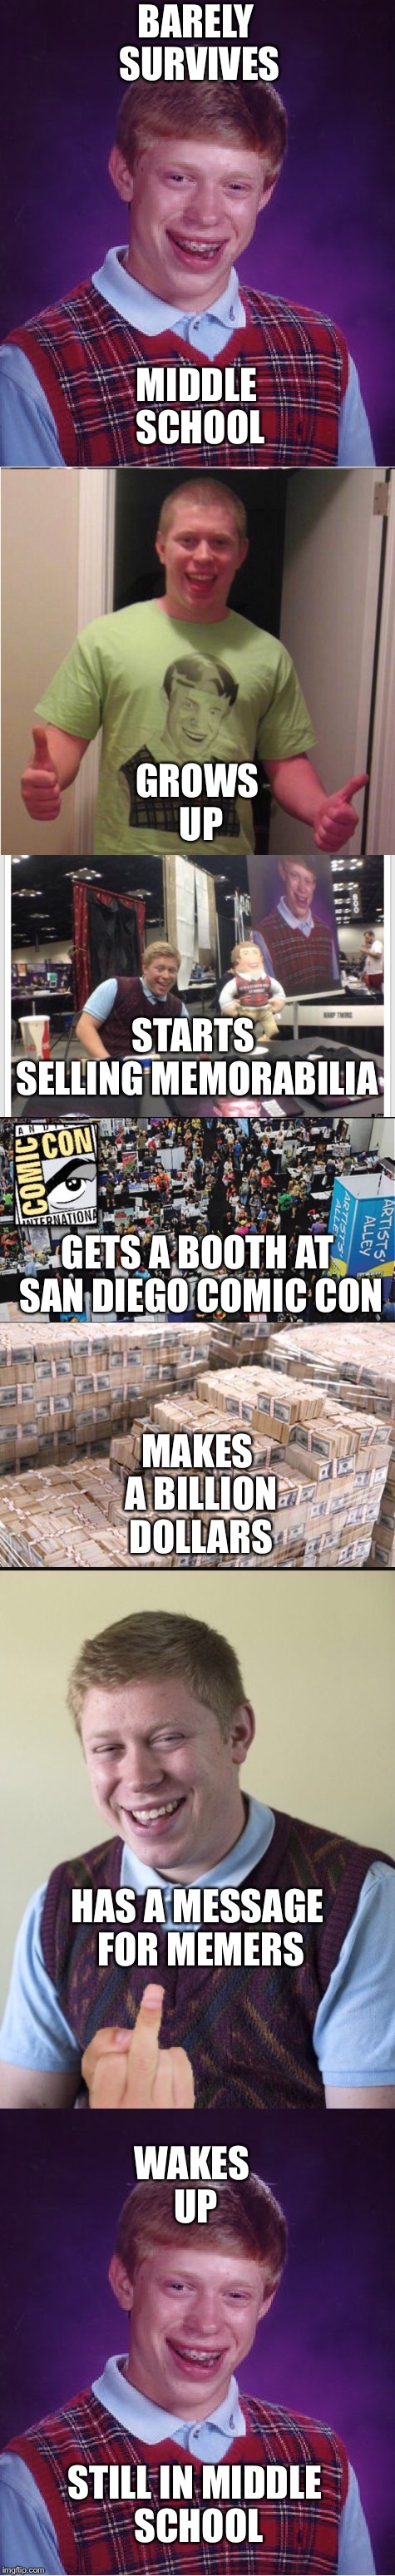 Bad luck Brian the saga continues | BARELY SURVIVES; MIDDLE SCHOOL; GROWS UP; STARTS SELLING MEMORABILIA; GETS A BOOTH AT SAN DIEGO COMIC CON; MAKES A BILLION DOLLARS; HAS A MESSAGE FOR MEMERS; WAKES UP; STILL IN MIDDLE SCHOOL | image tagged in bad luck brian,comic con,money,memes,funny,meme chain | made w/ Imgflip meme maker